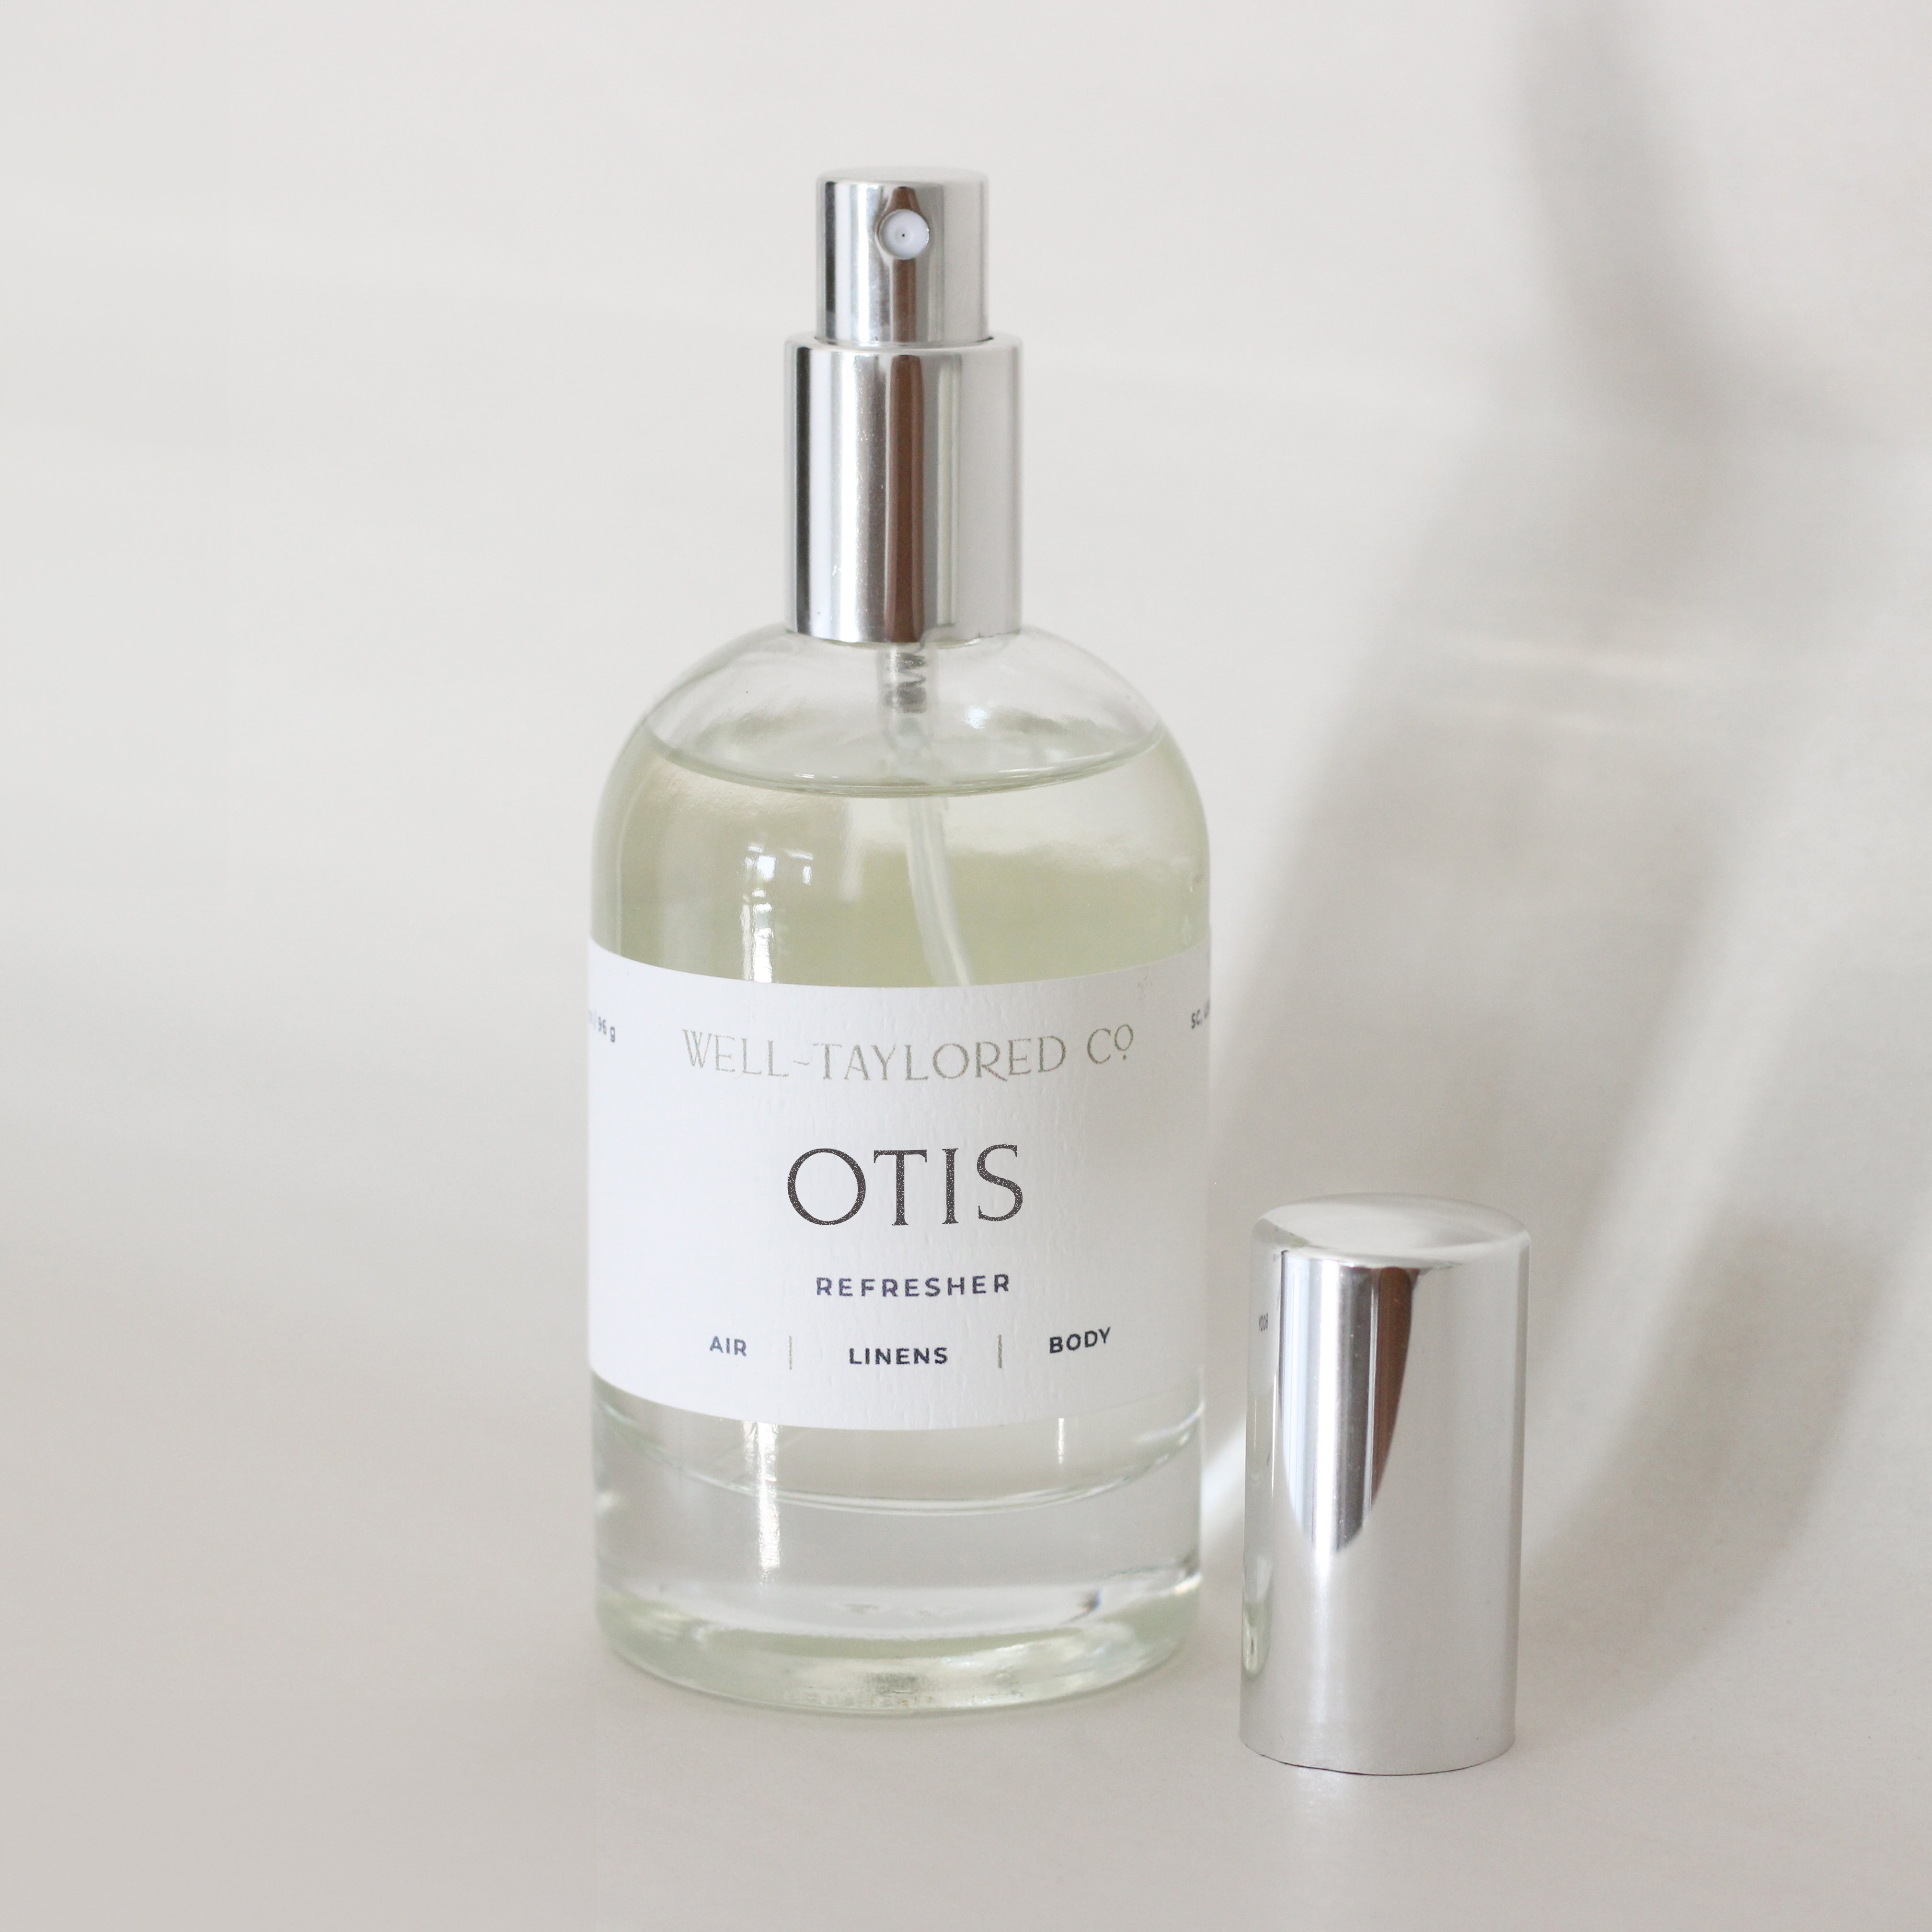 Otis Air & Linen Refresher | Well-Taylored Co.